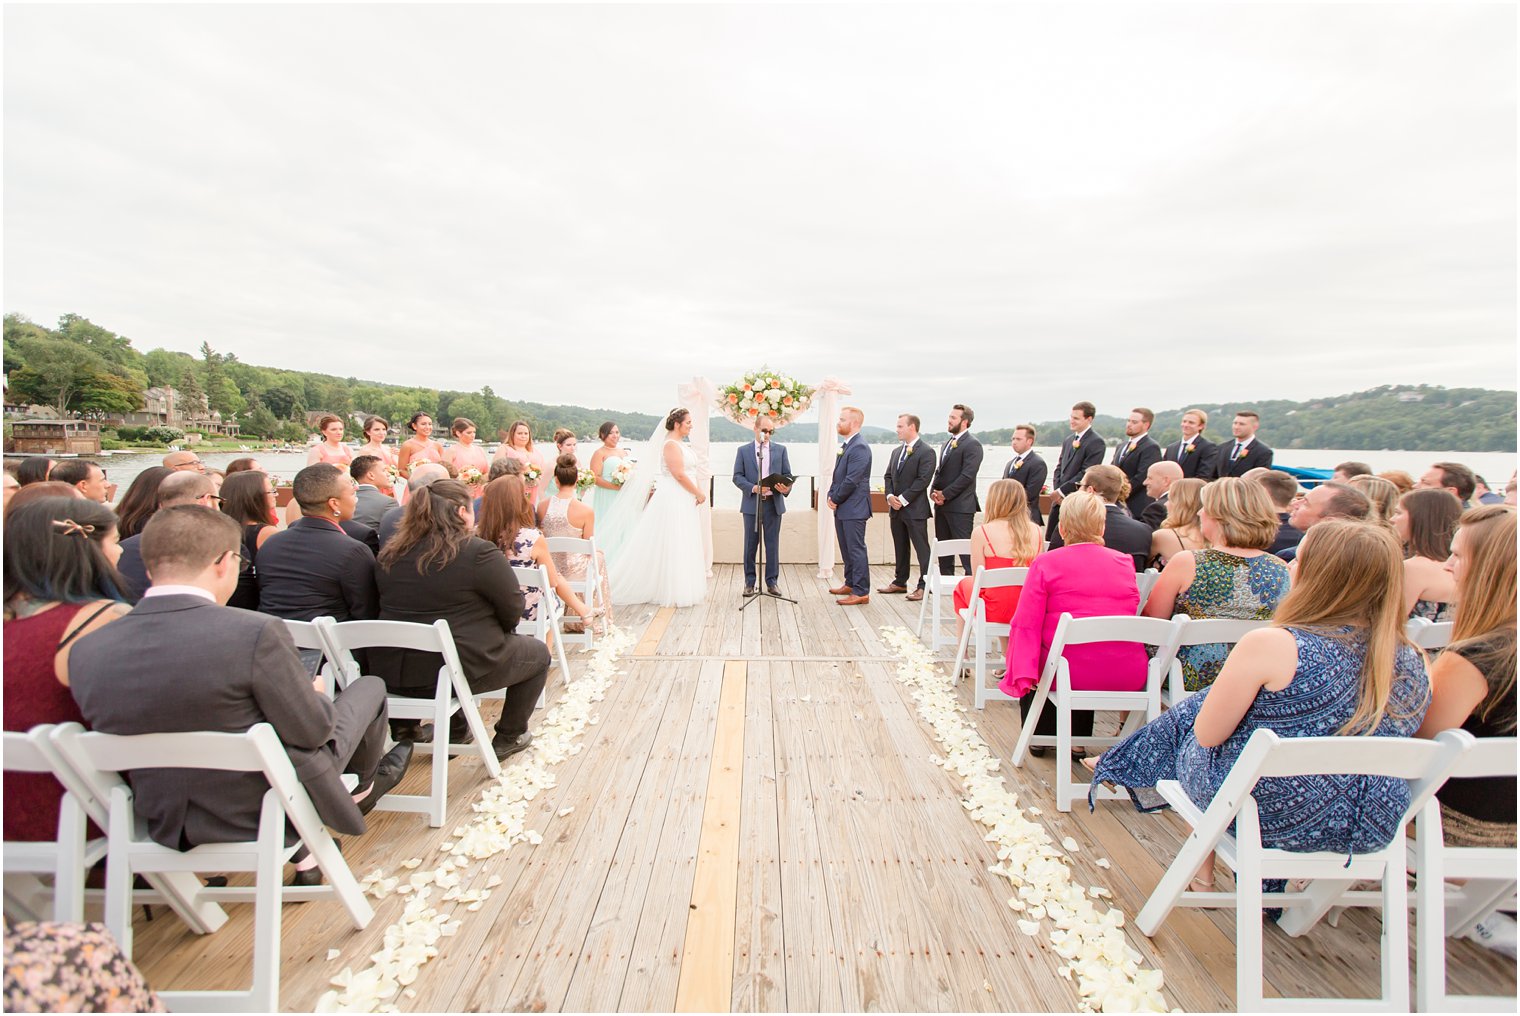 outdoor wedding ceremony at Lake Mohawk Country Club photographed by Idalia Photography